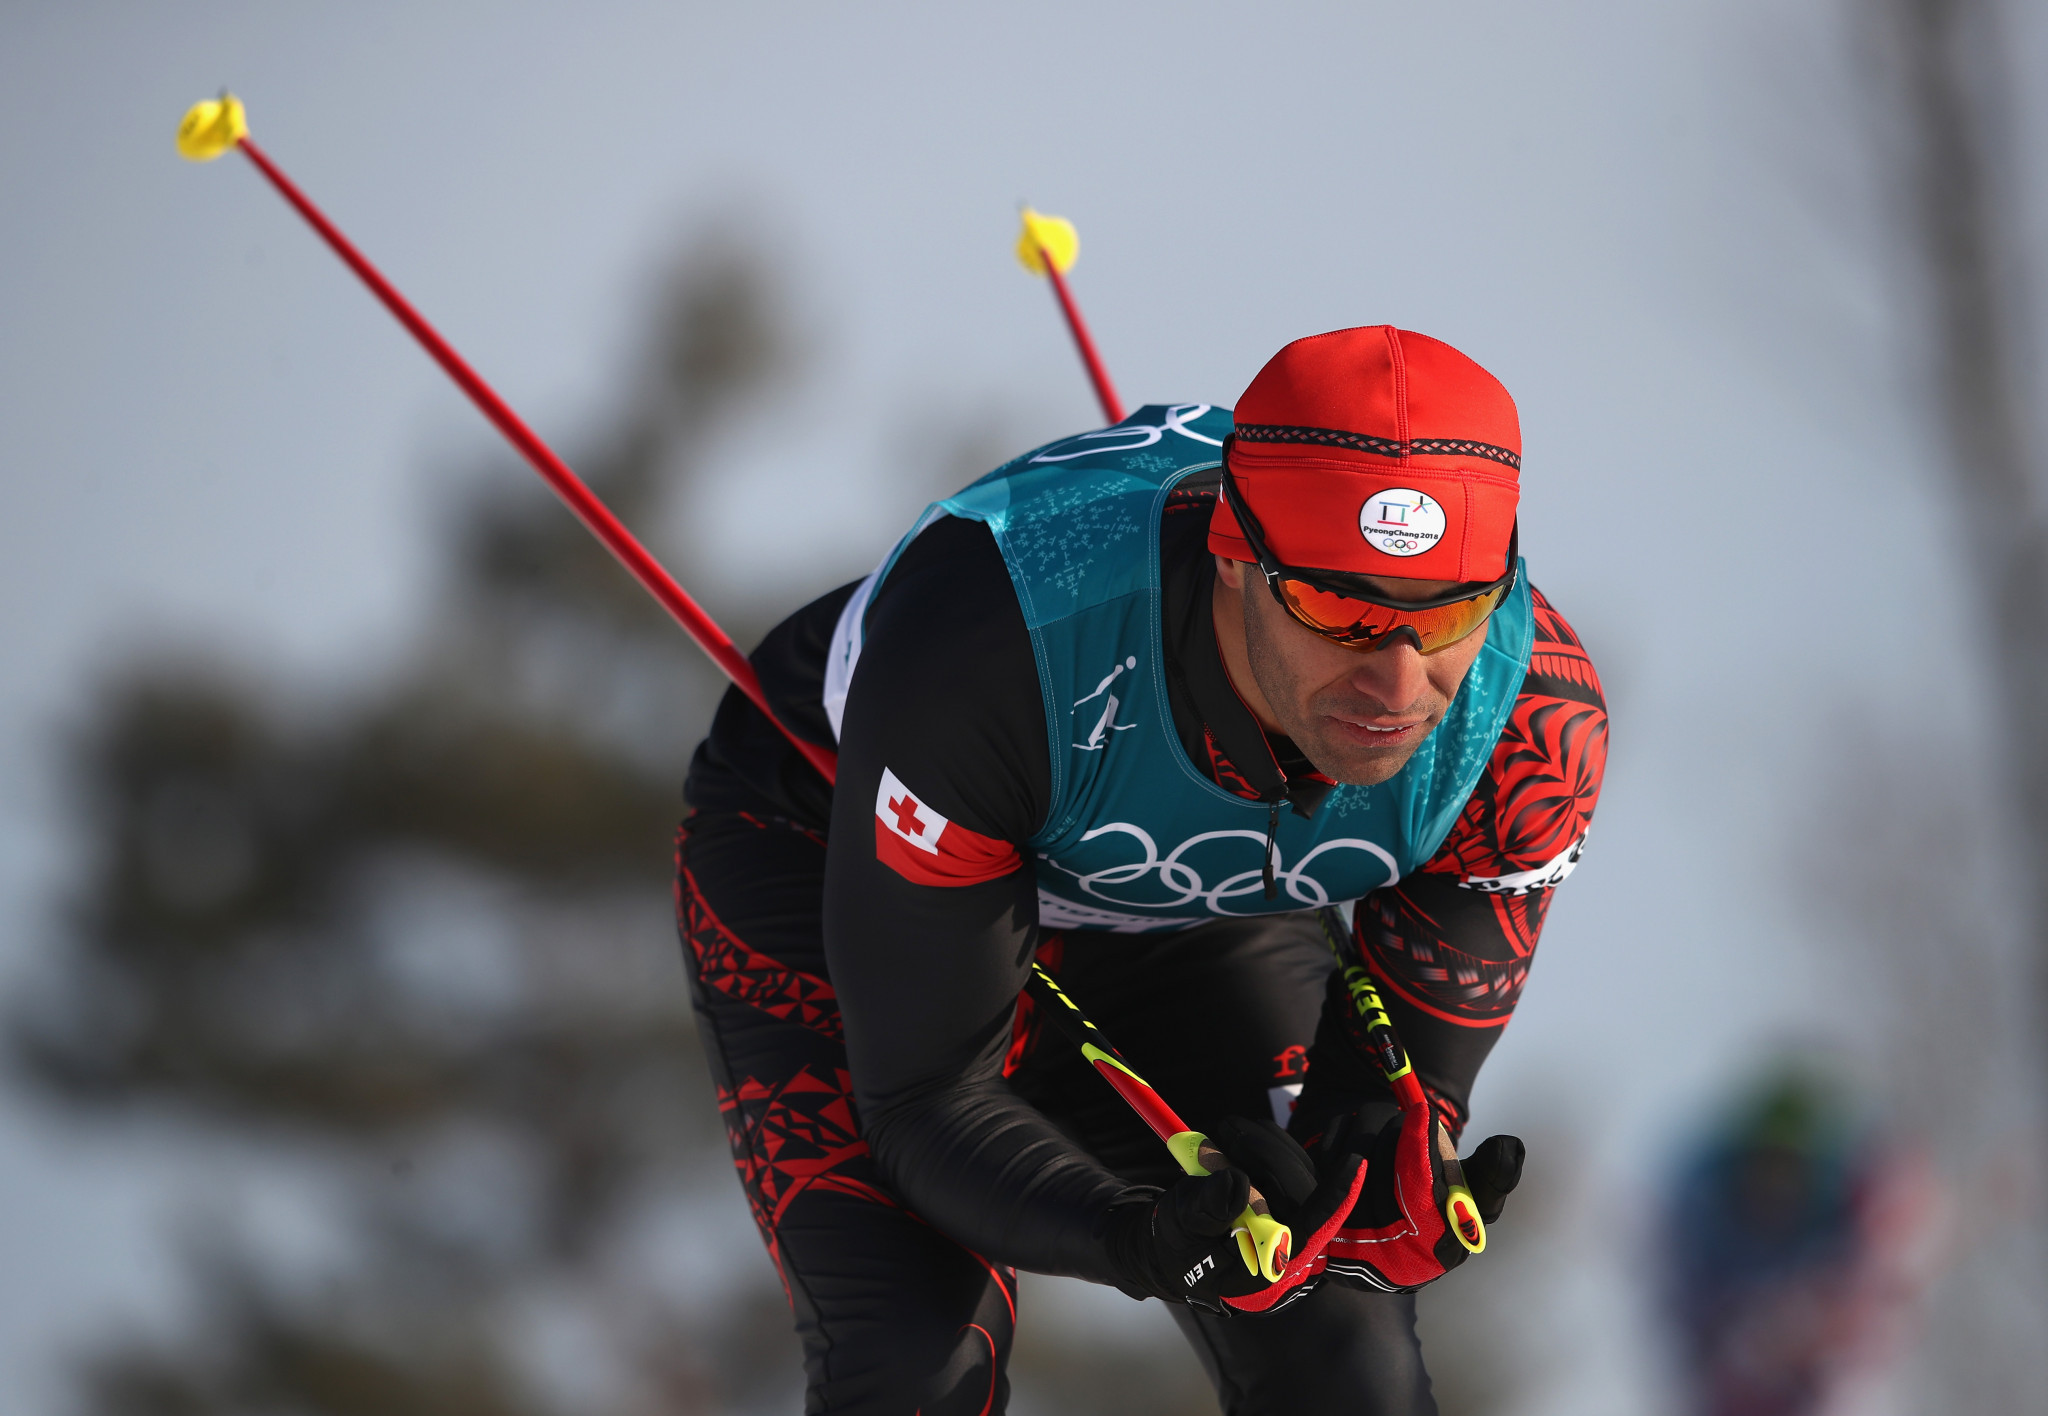 Pita Taufatofua is competing in the cross-country skiing event at Pyeongchang 2018 ©Getty Images